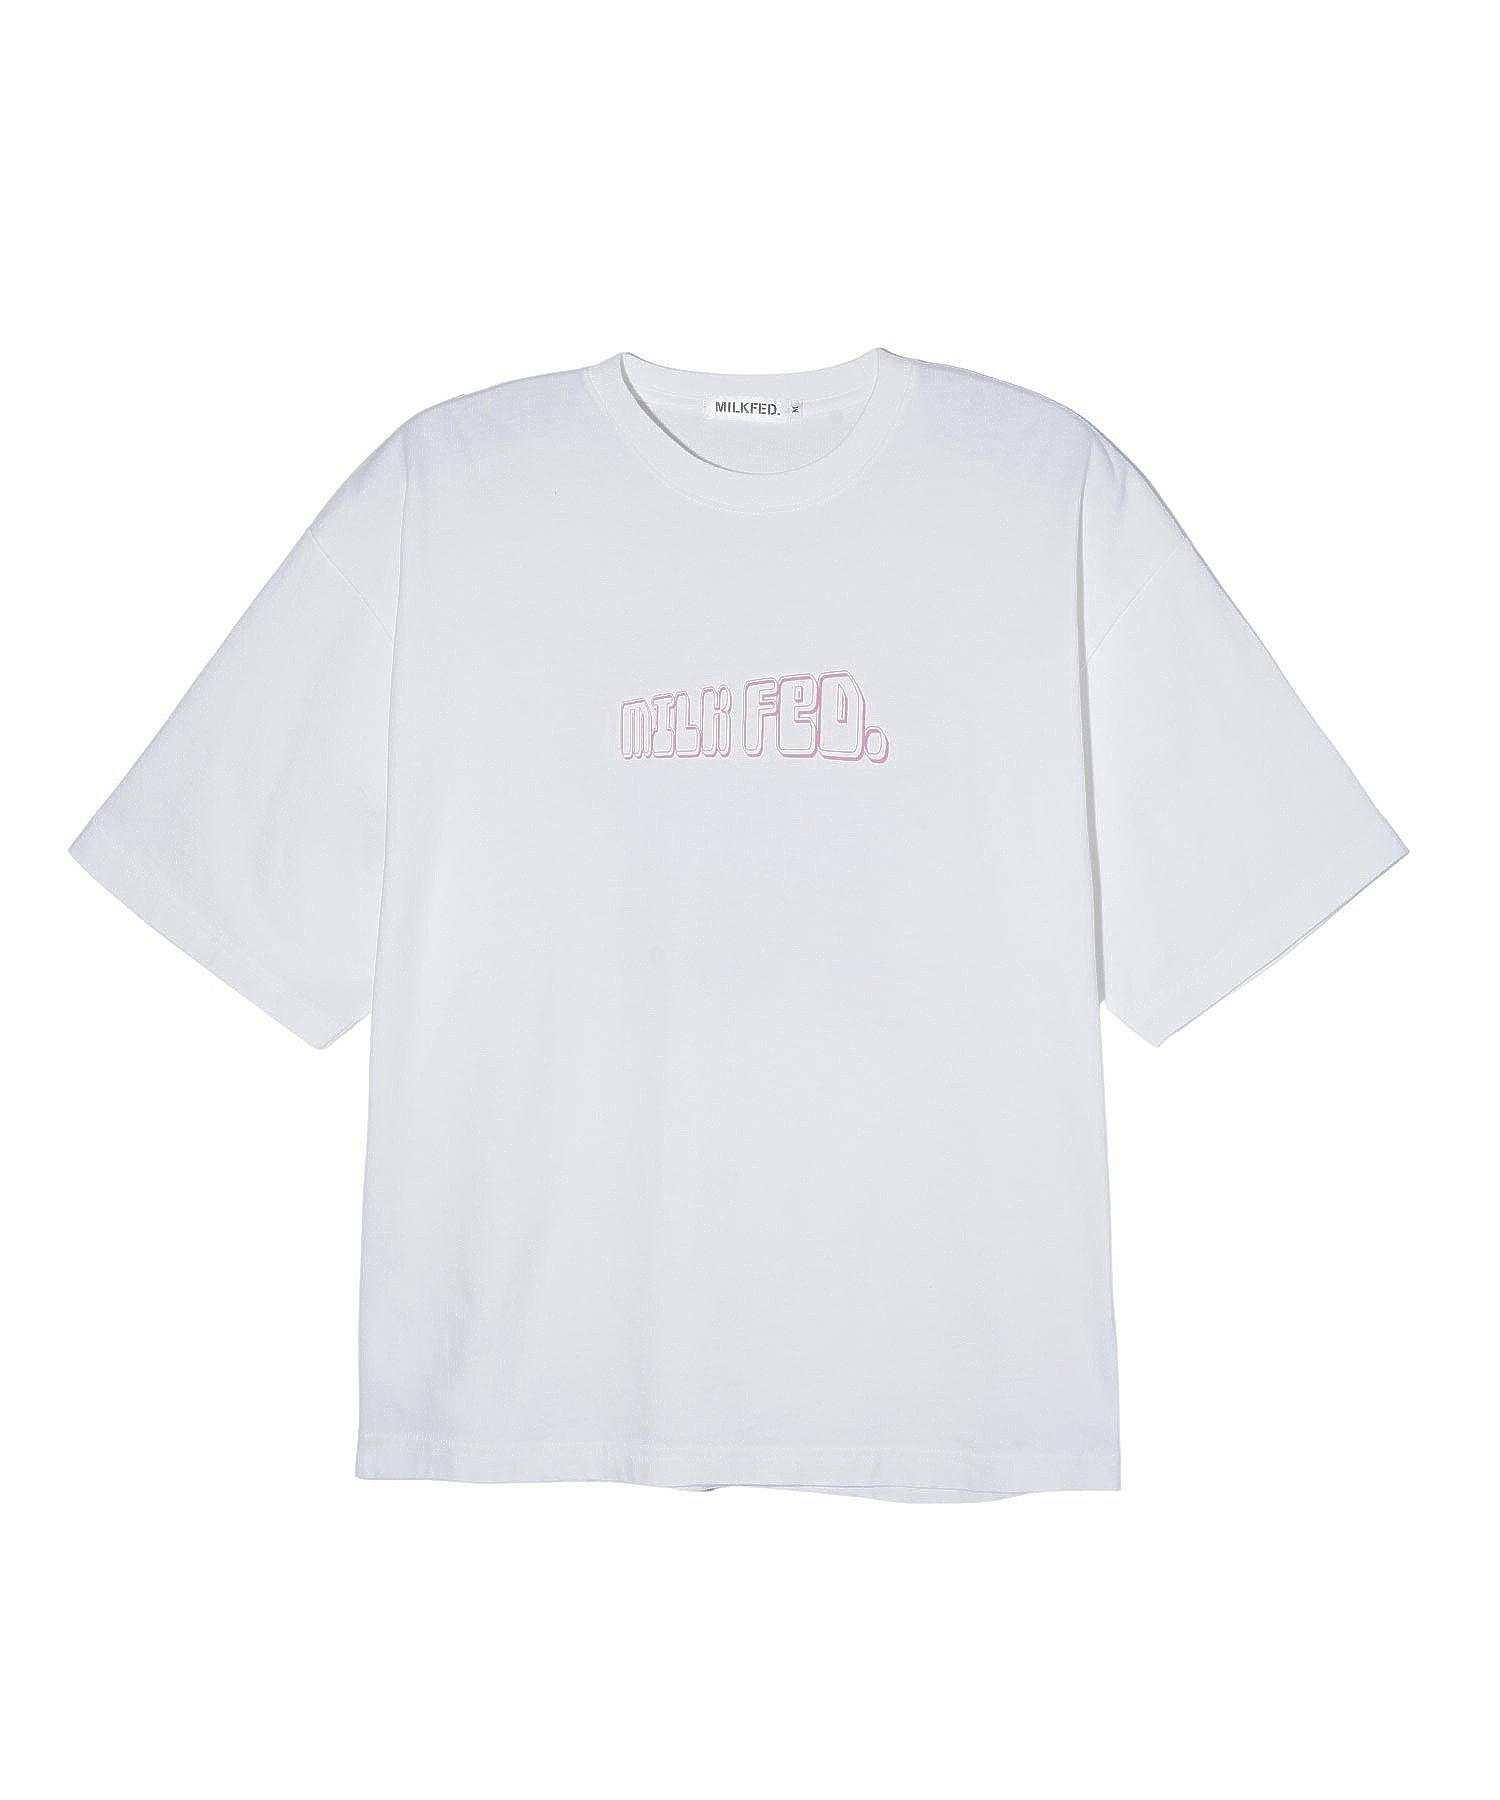 CAR GRAPHIC WIDE S/S TEE